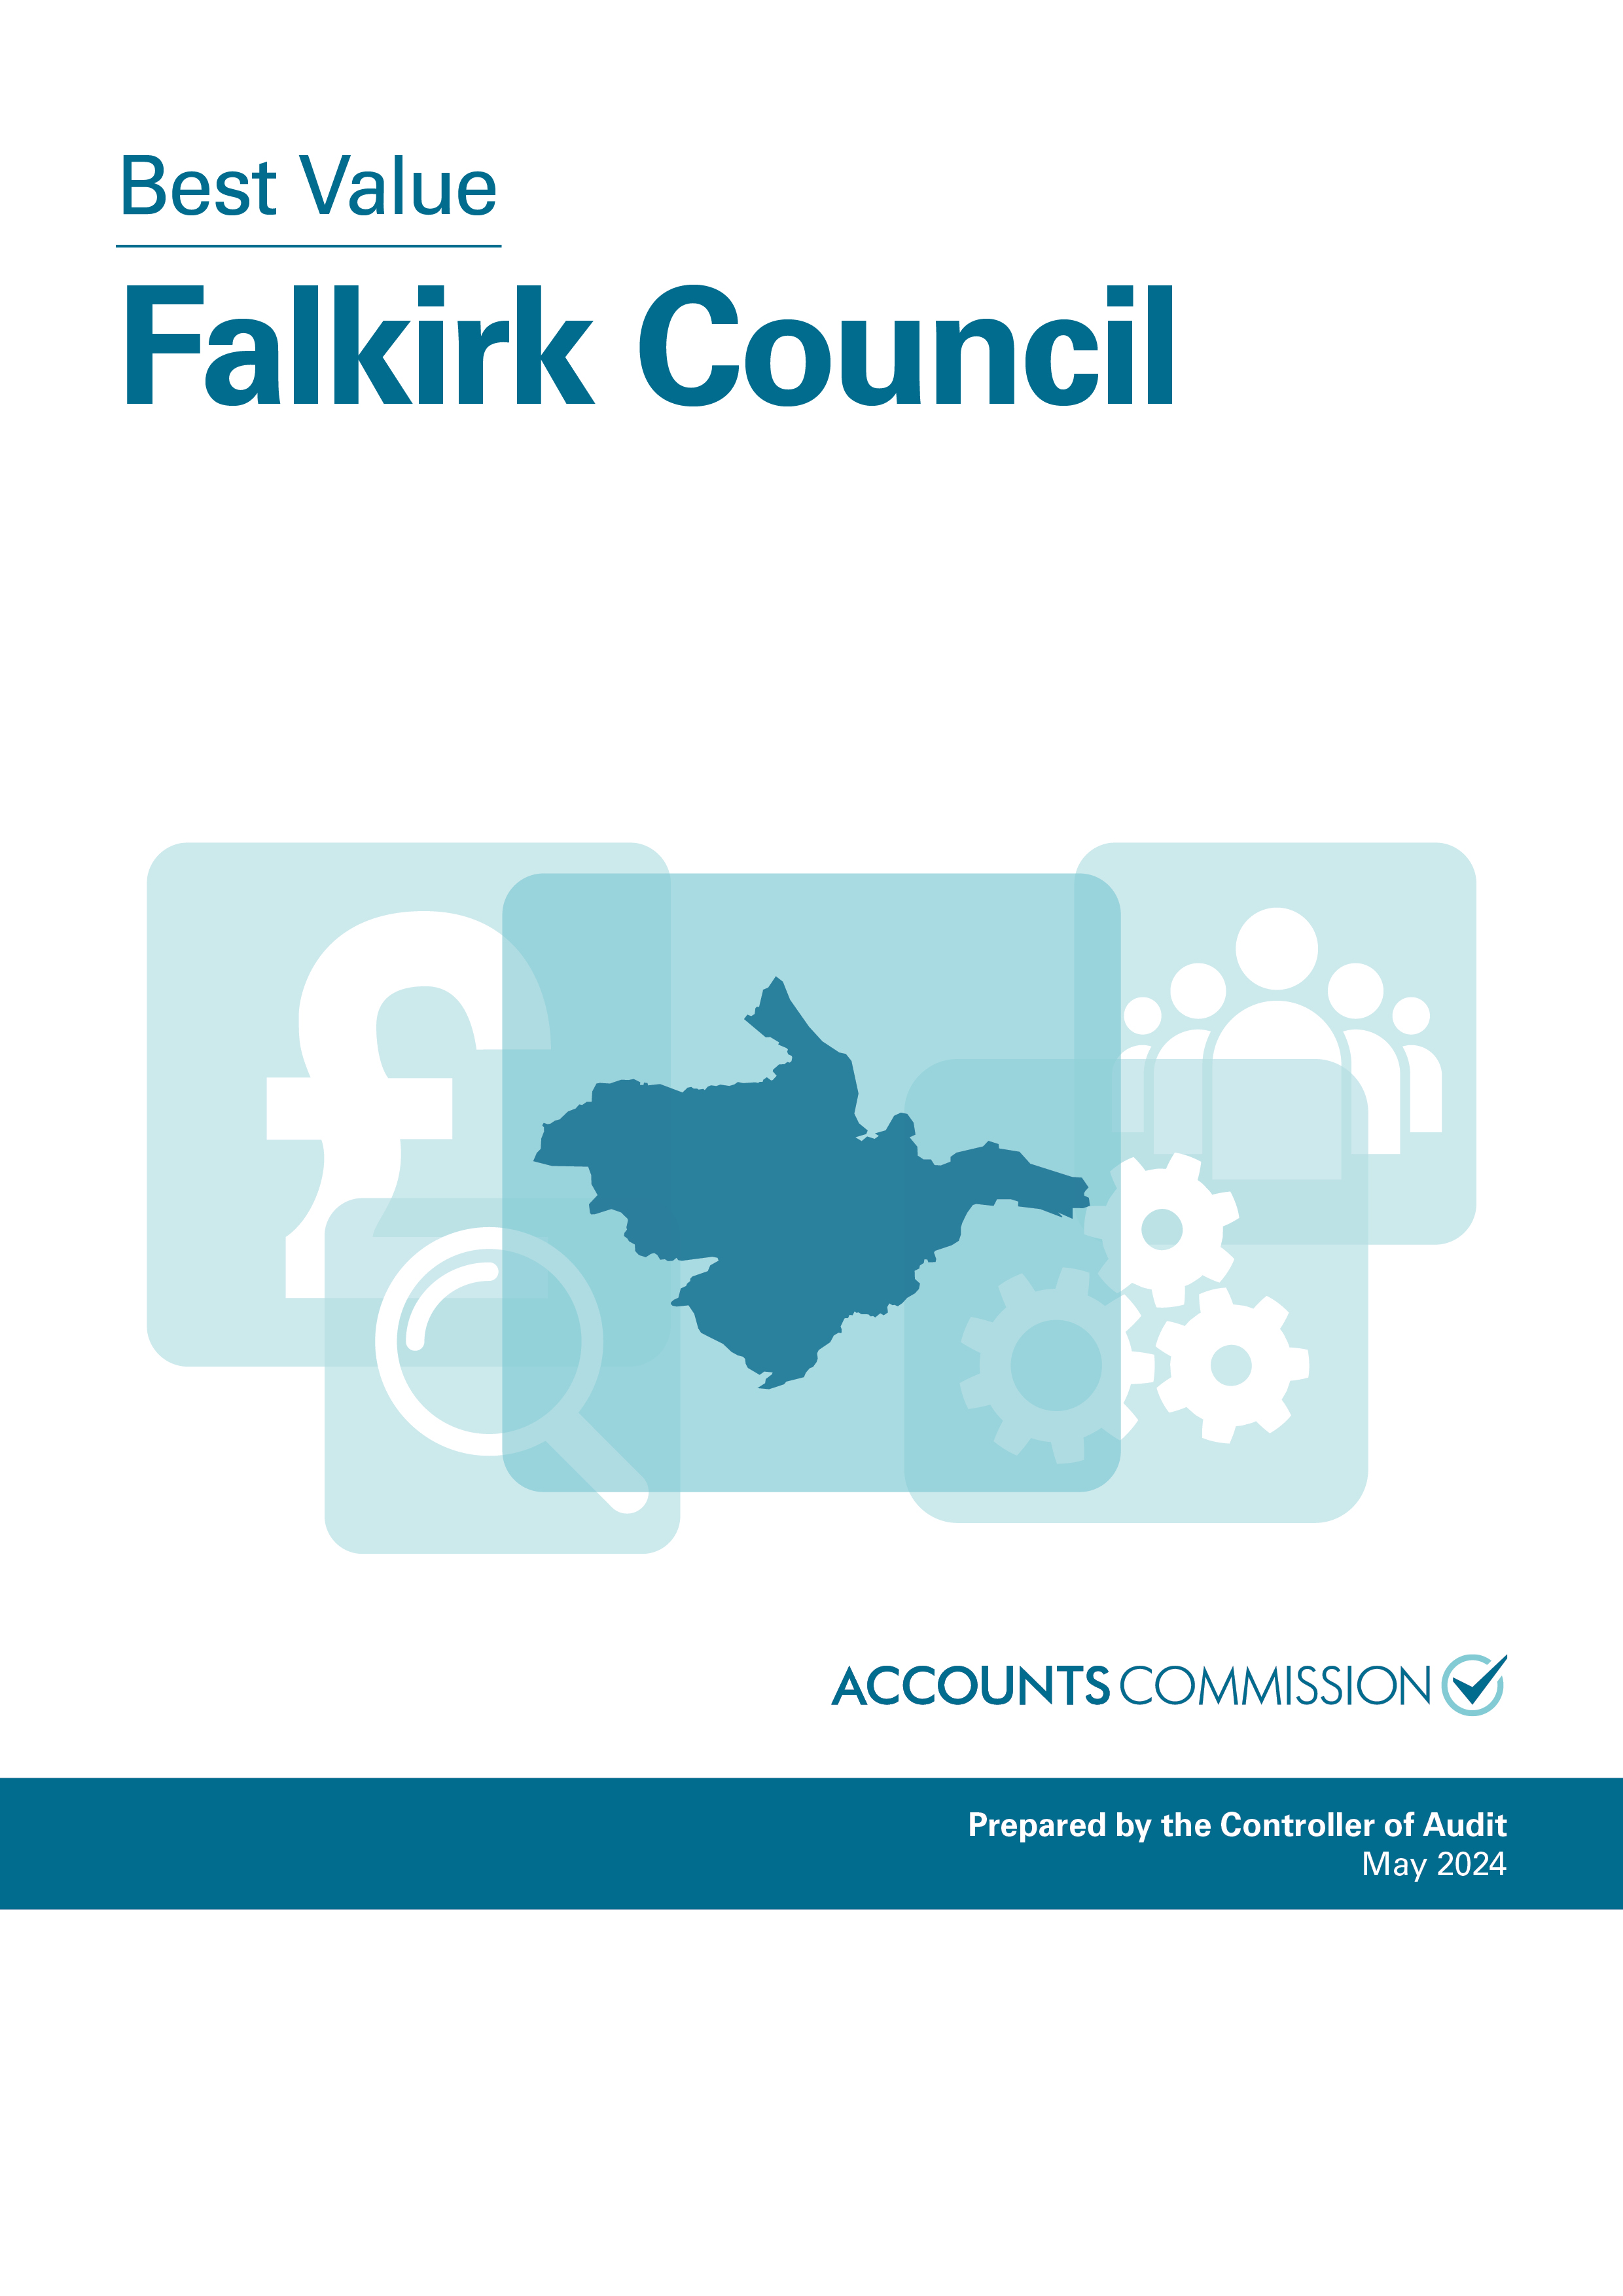 View Controller of Audit report: Falkirk Council